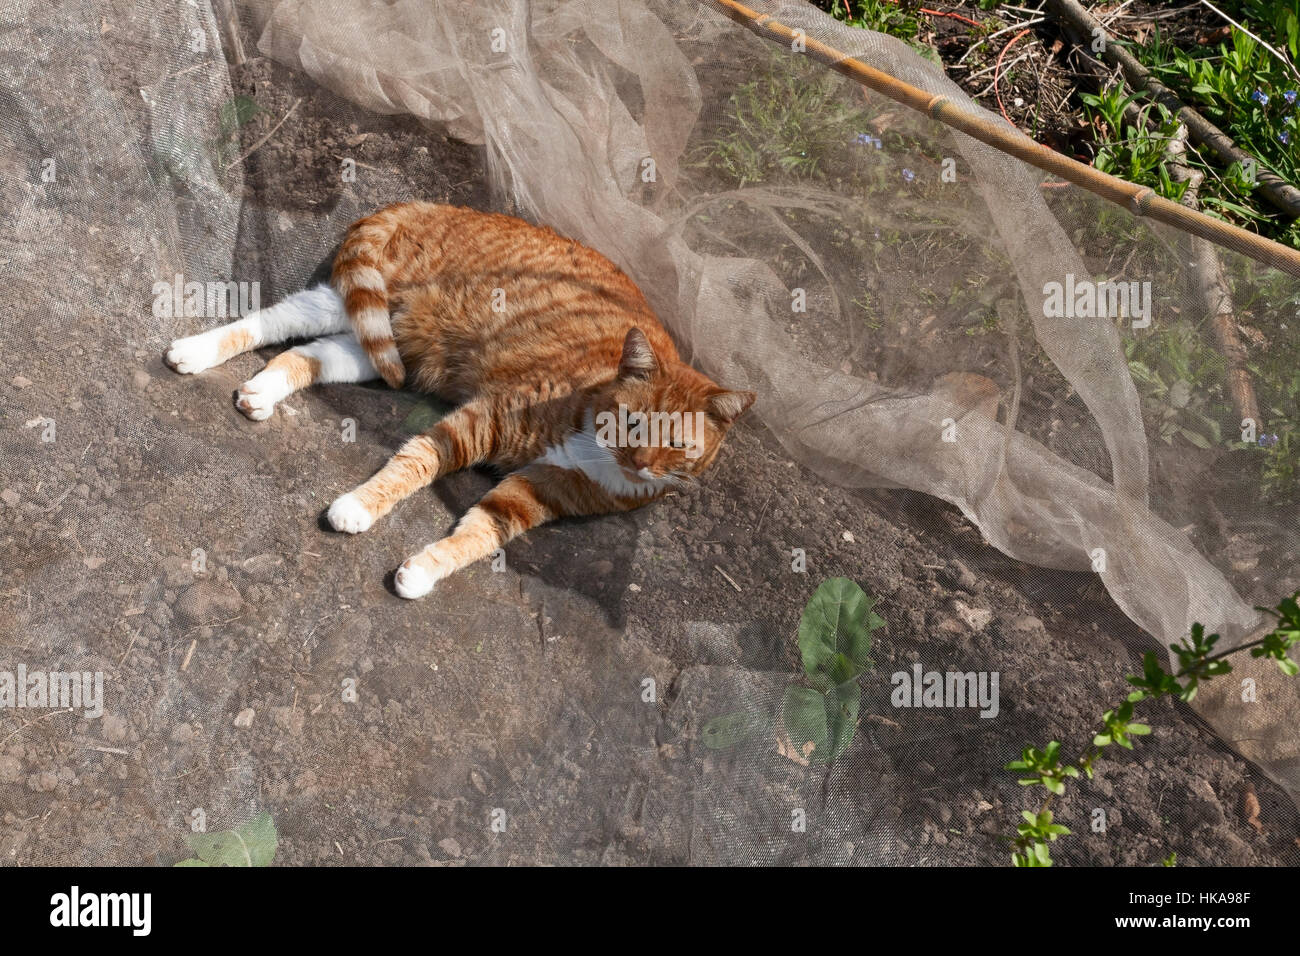 A domestic cat weighing down fleece protection in a vegetable garden Stock Photo